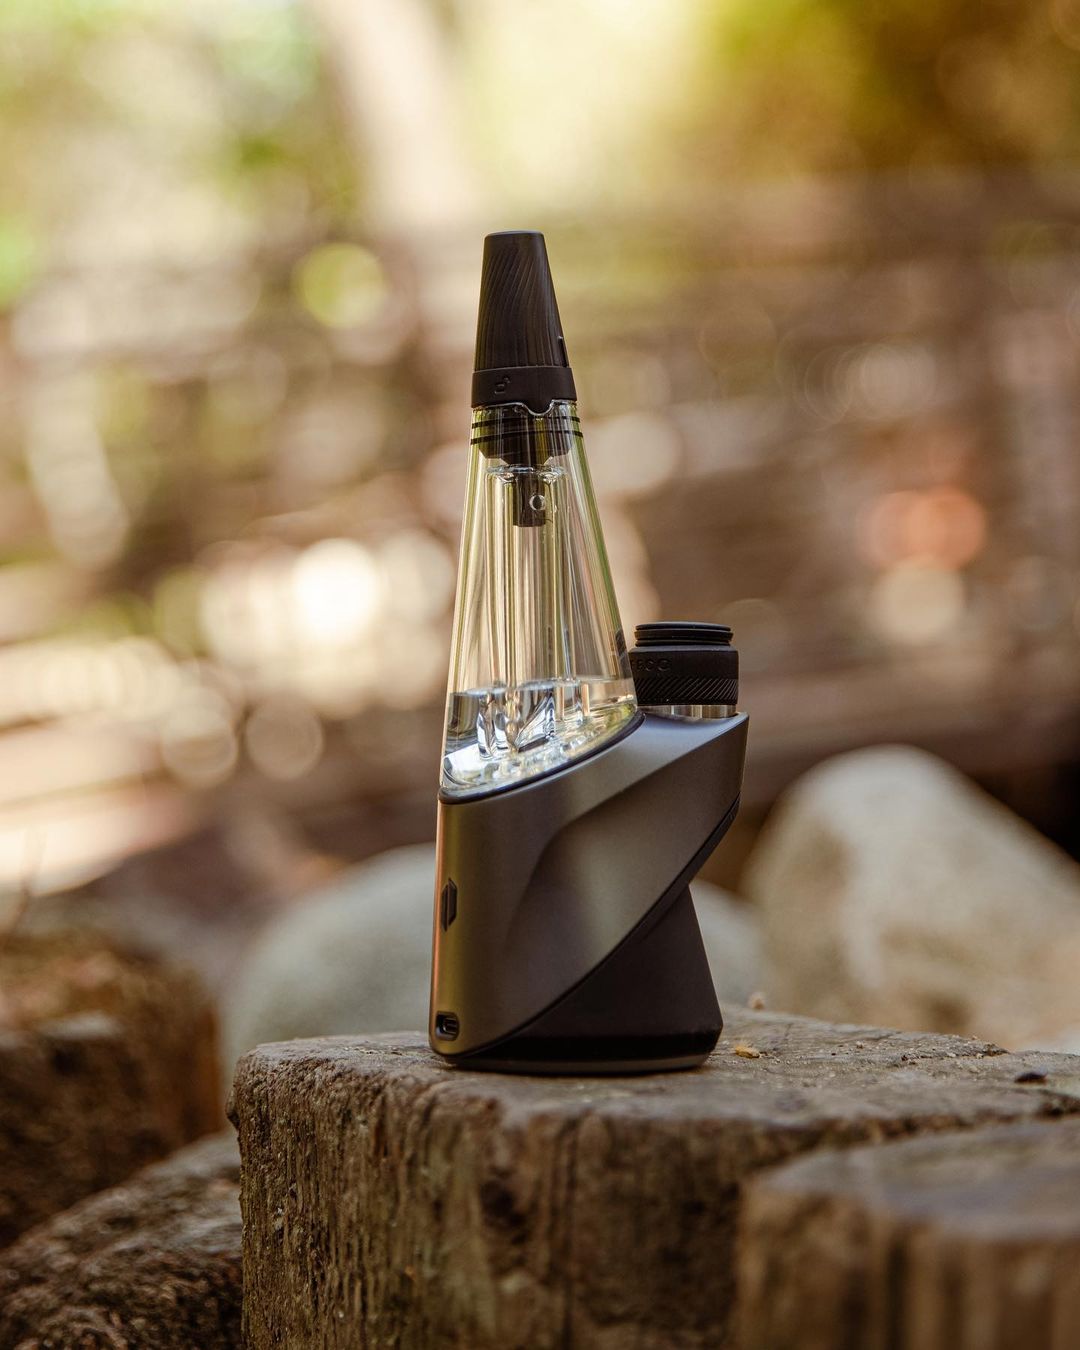 Where to buy the PuffCo Peak Pro Chamber? — Quick Clouds